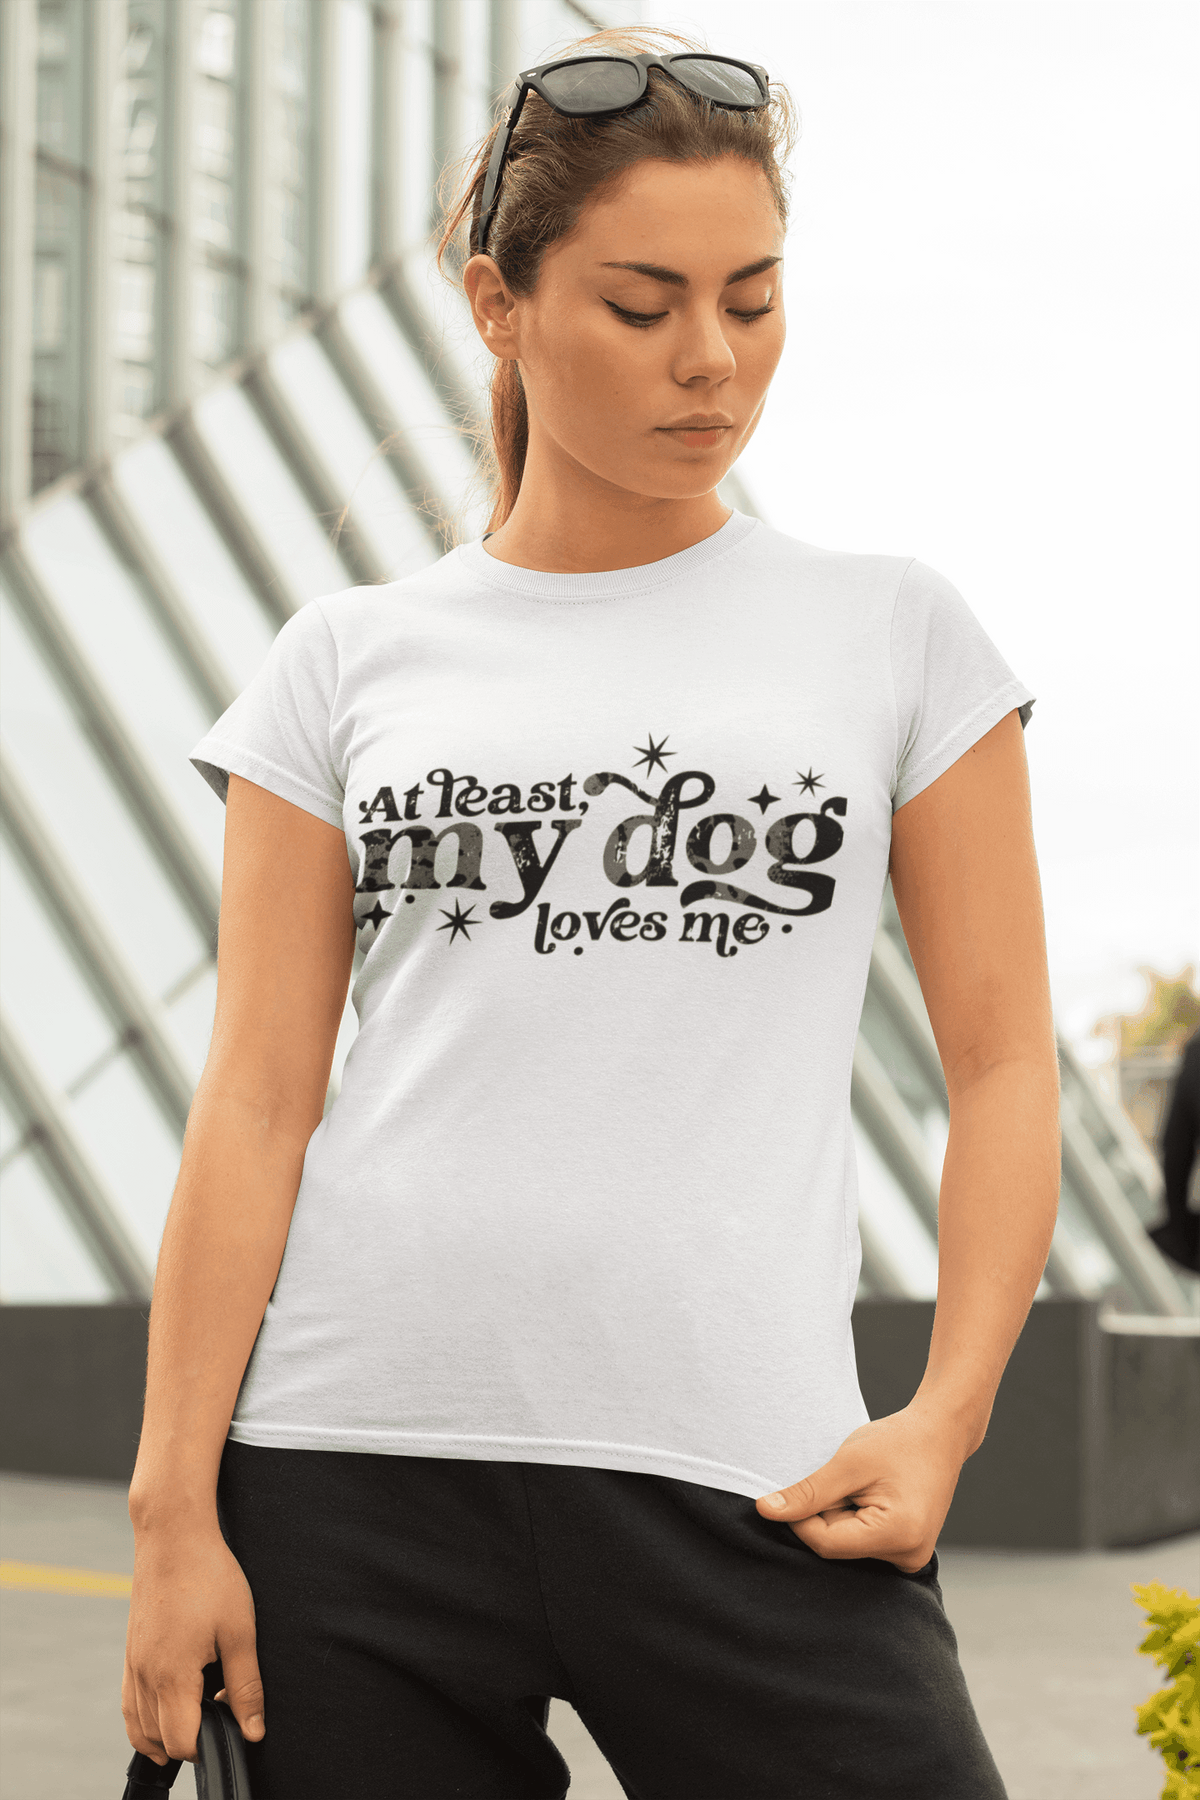 MY DOG LOVES ME T-shirt-Regular Fit Tee-StylinArts